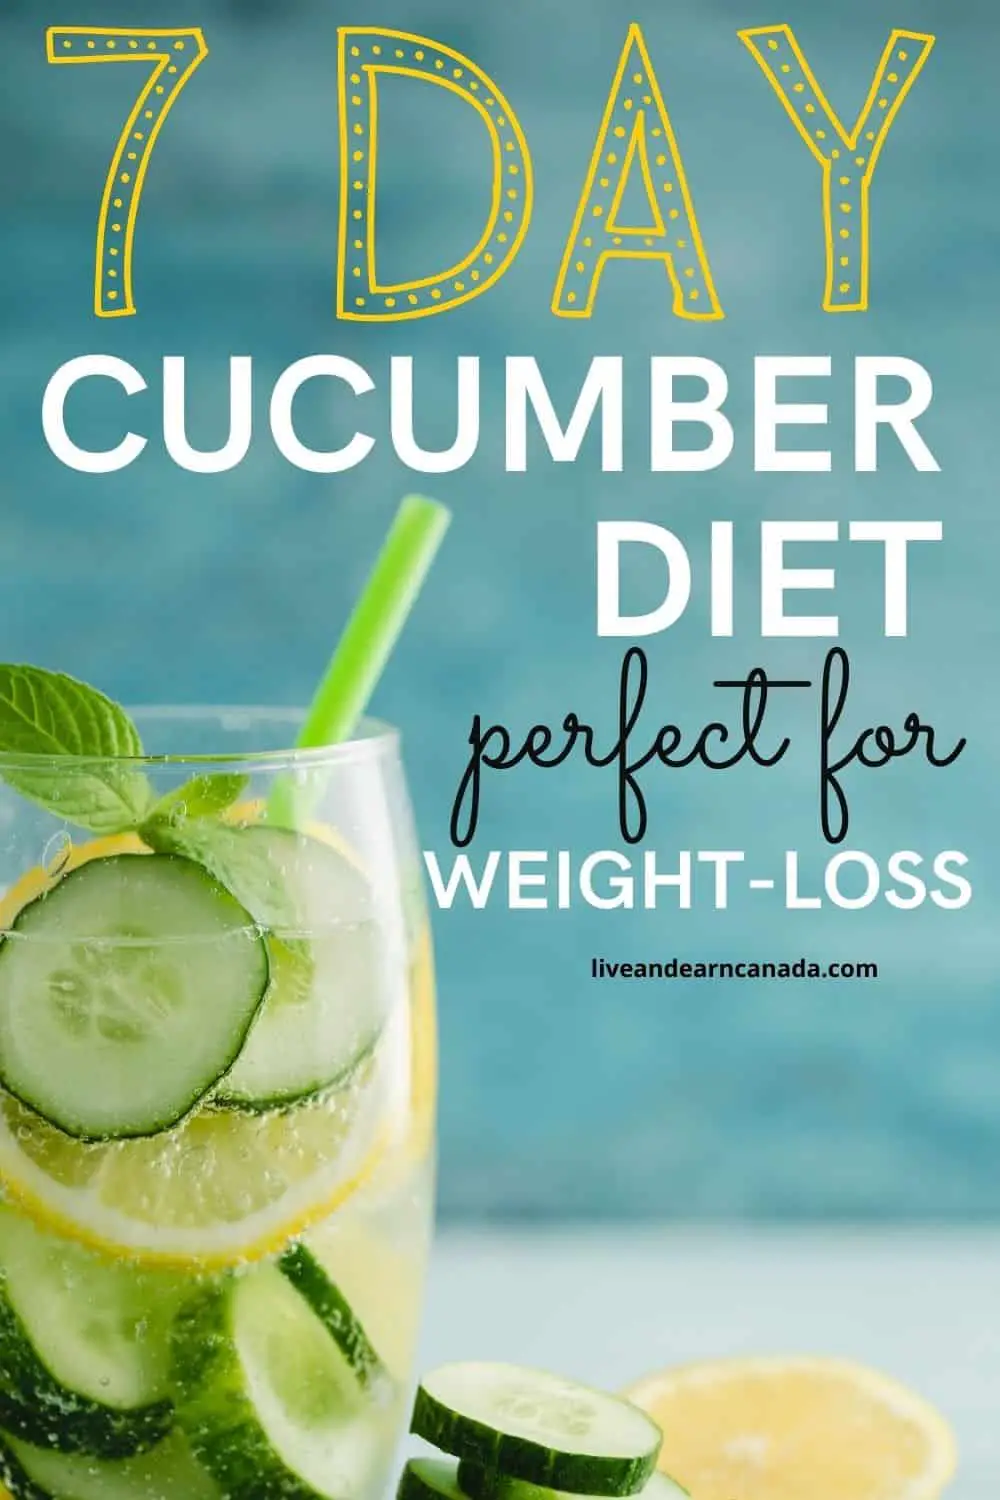 Cucumber Diet Lose 15 Pounds In 7 Days! Do you like cucumbers? That’s good for you! A cucumber is a tasty, low-calorie vegetable that can help you slim down easily. One average cucumber contains twenty calories, which is very good for weight loss. Read one fast diet you can use to drop those extra pounds 7 days. In fact, it's the cucumber diet together with its meal plan.